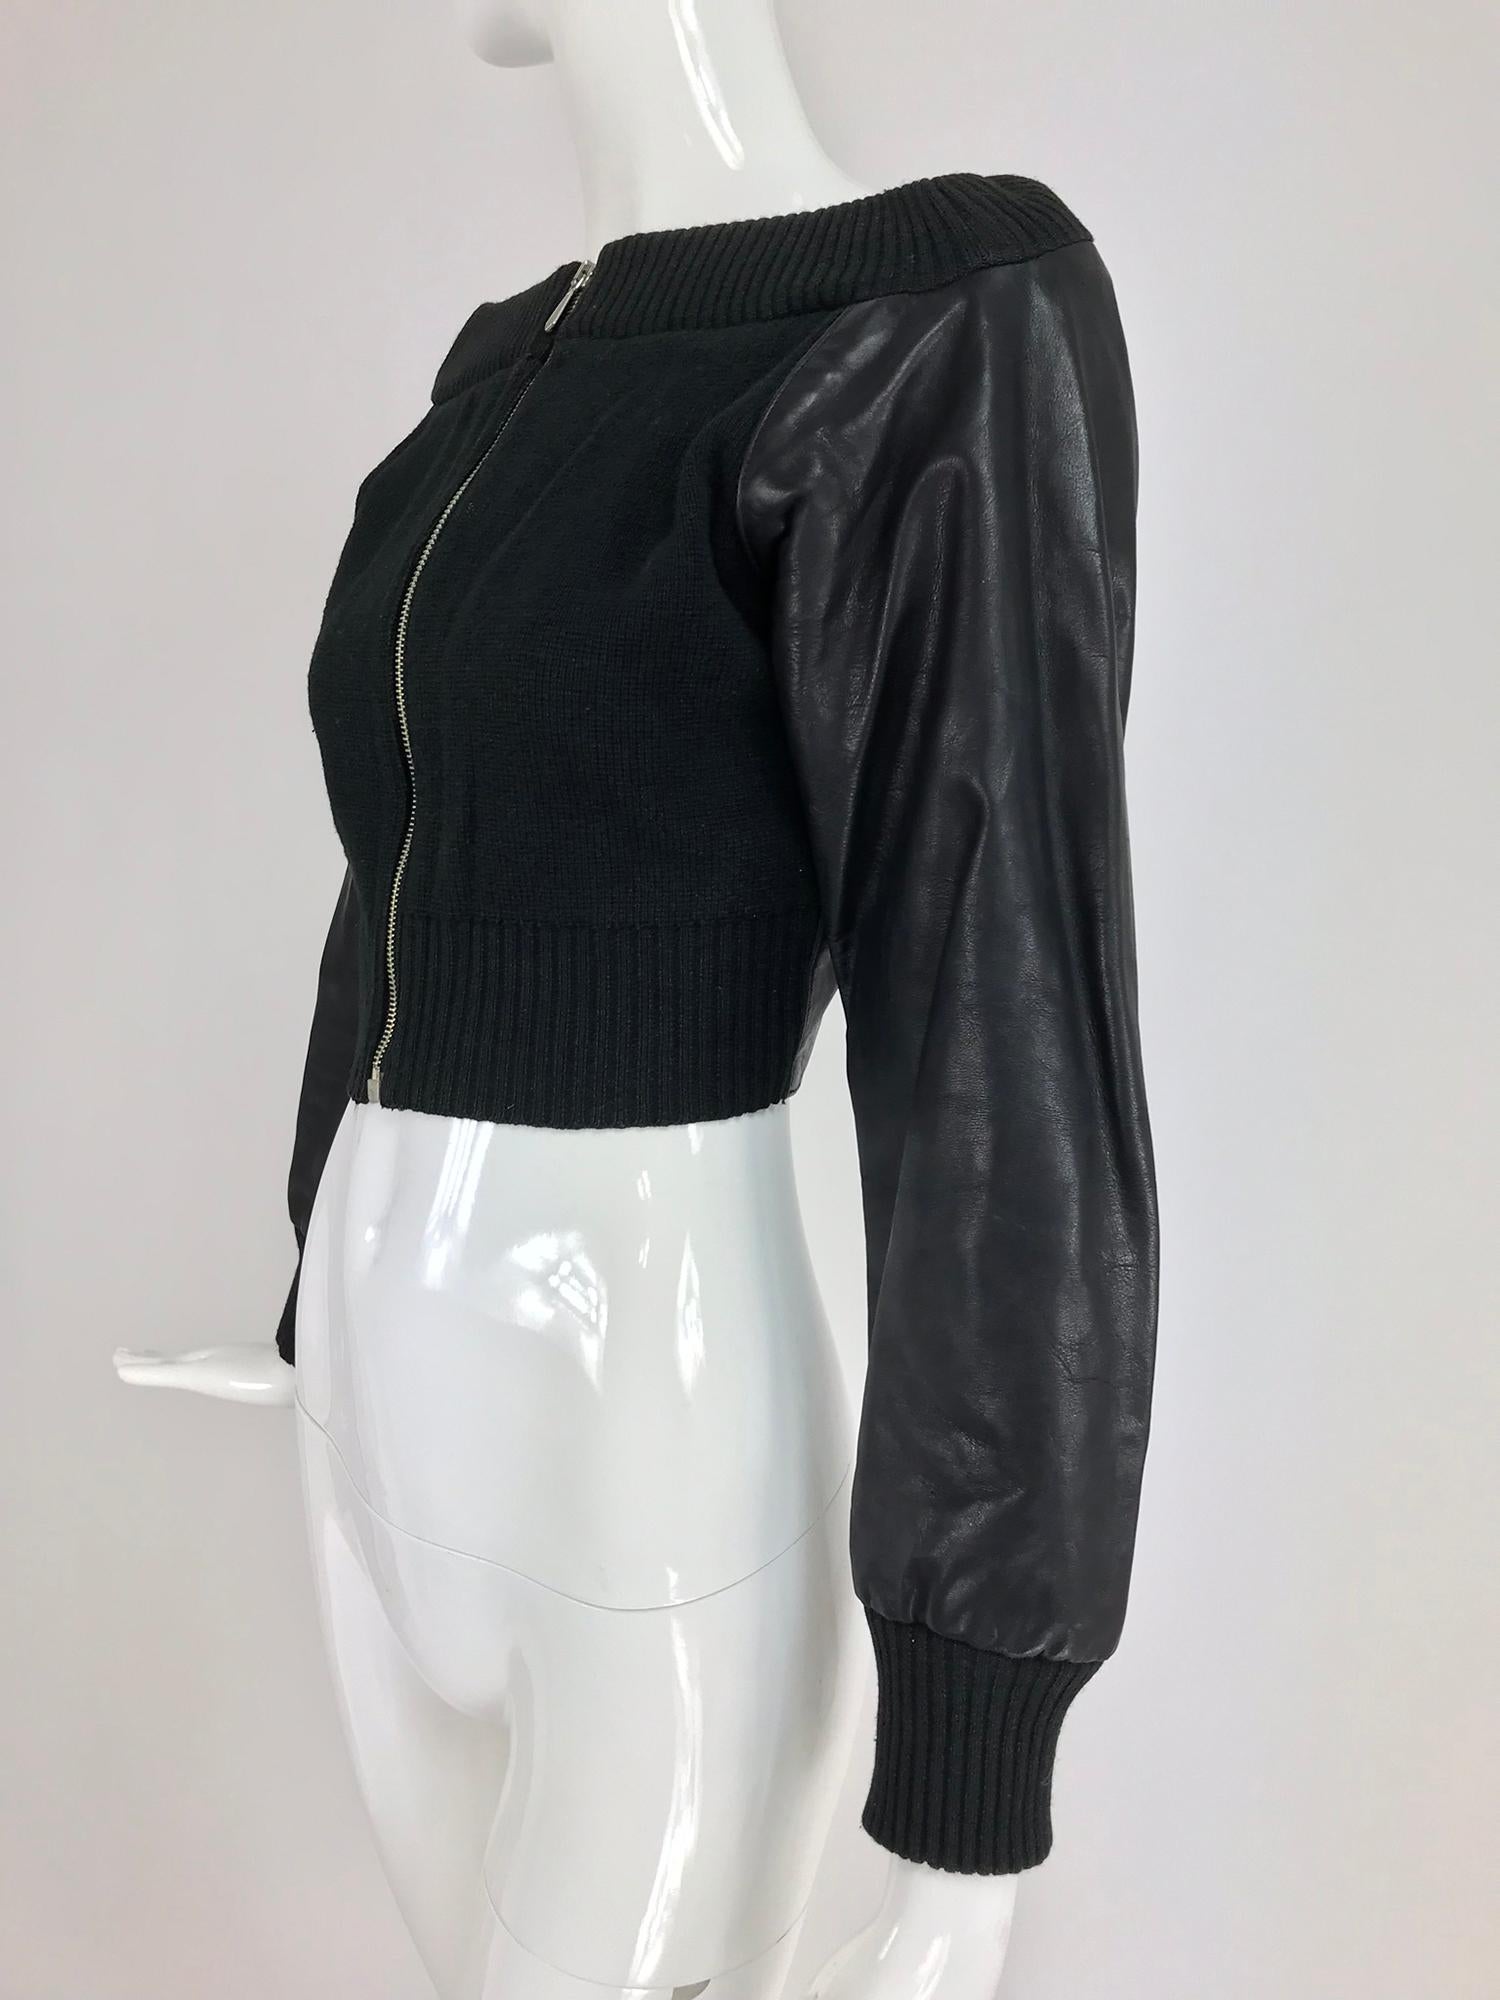 Jean Paul Gaultier black leather and Knit Off the Shoulder Jacket 1990s 5